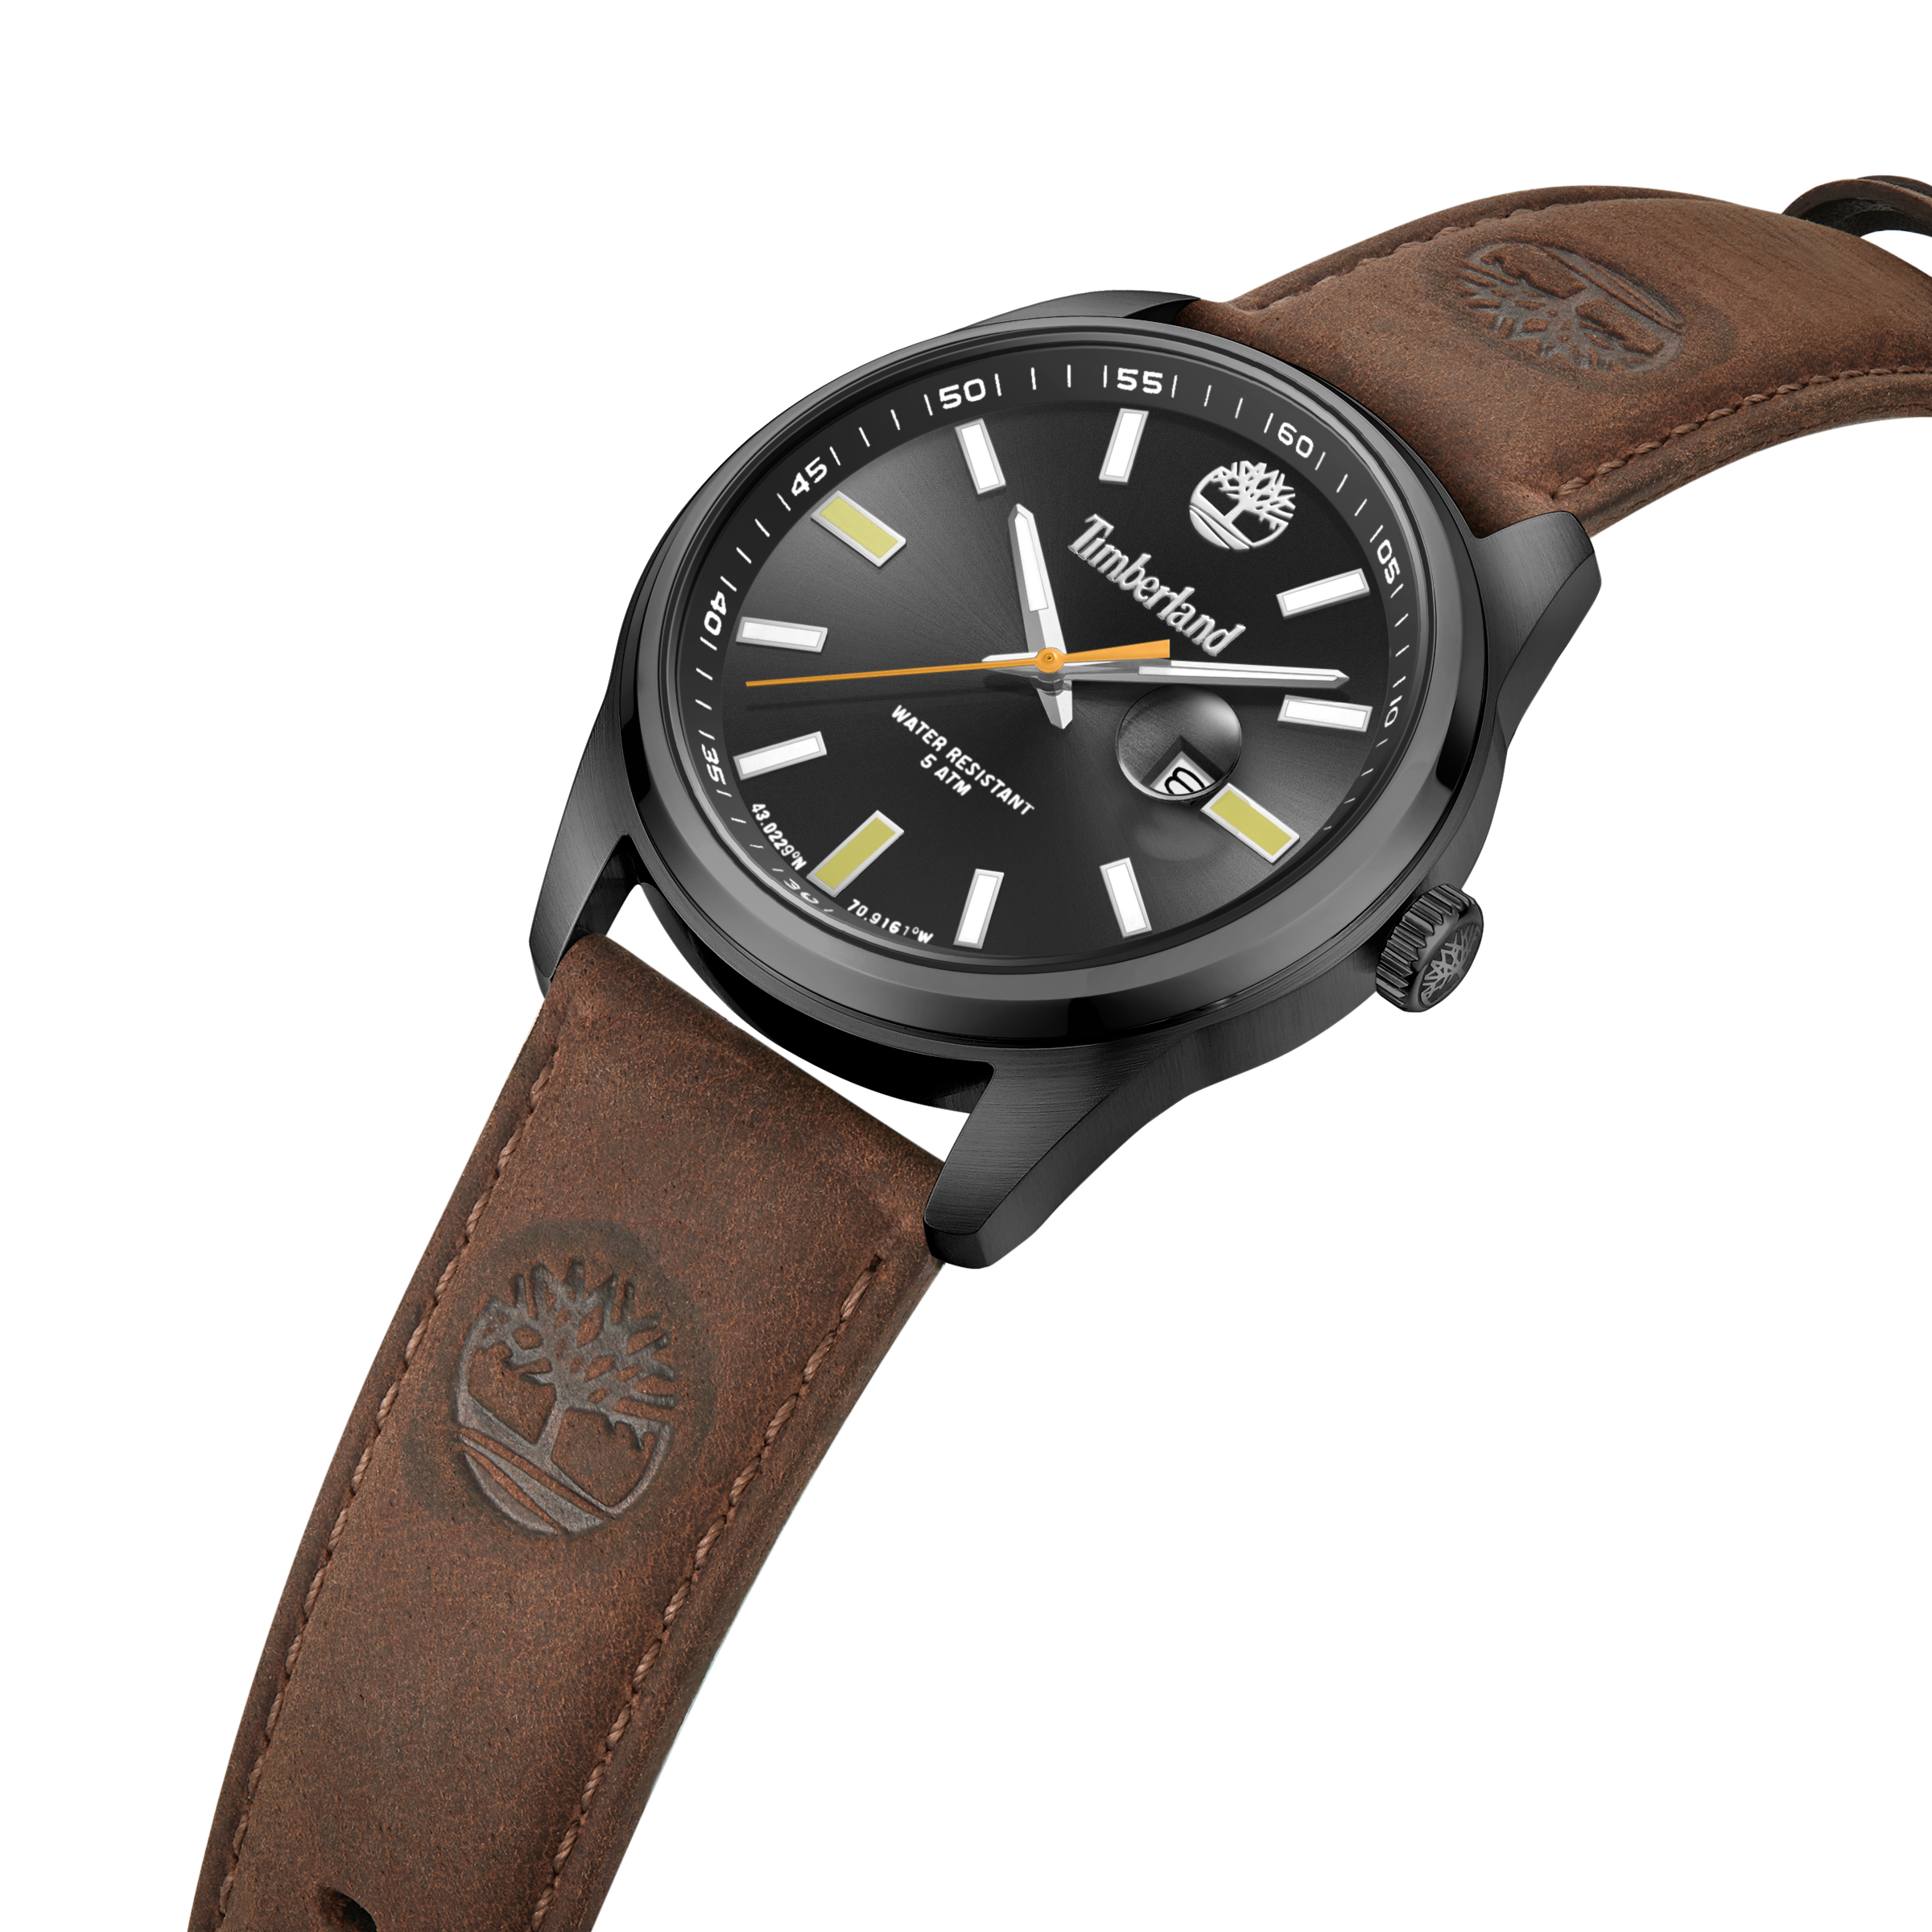 TIMBERLAND, ORFORD – ATAMIAN WATCHES